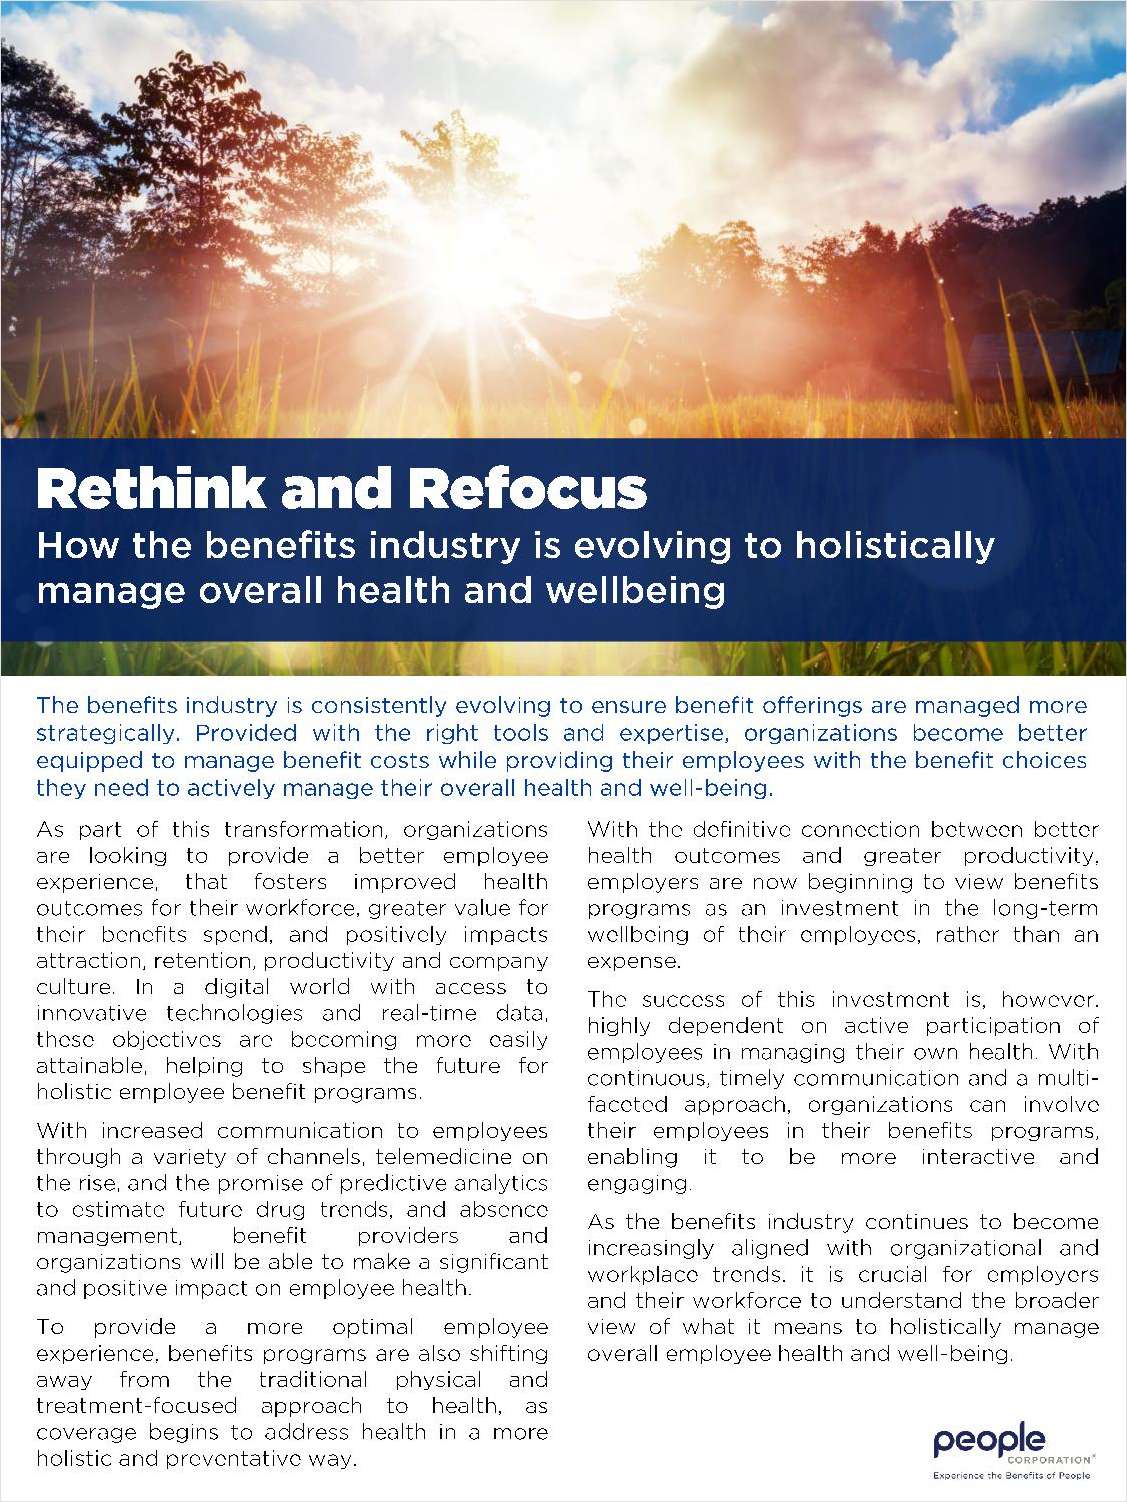 How the Benefits Industry is Evolving to Manage Overall Health and Wellbeing Holistically